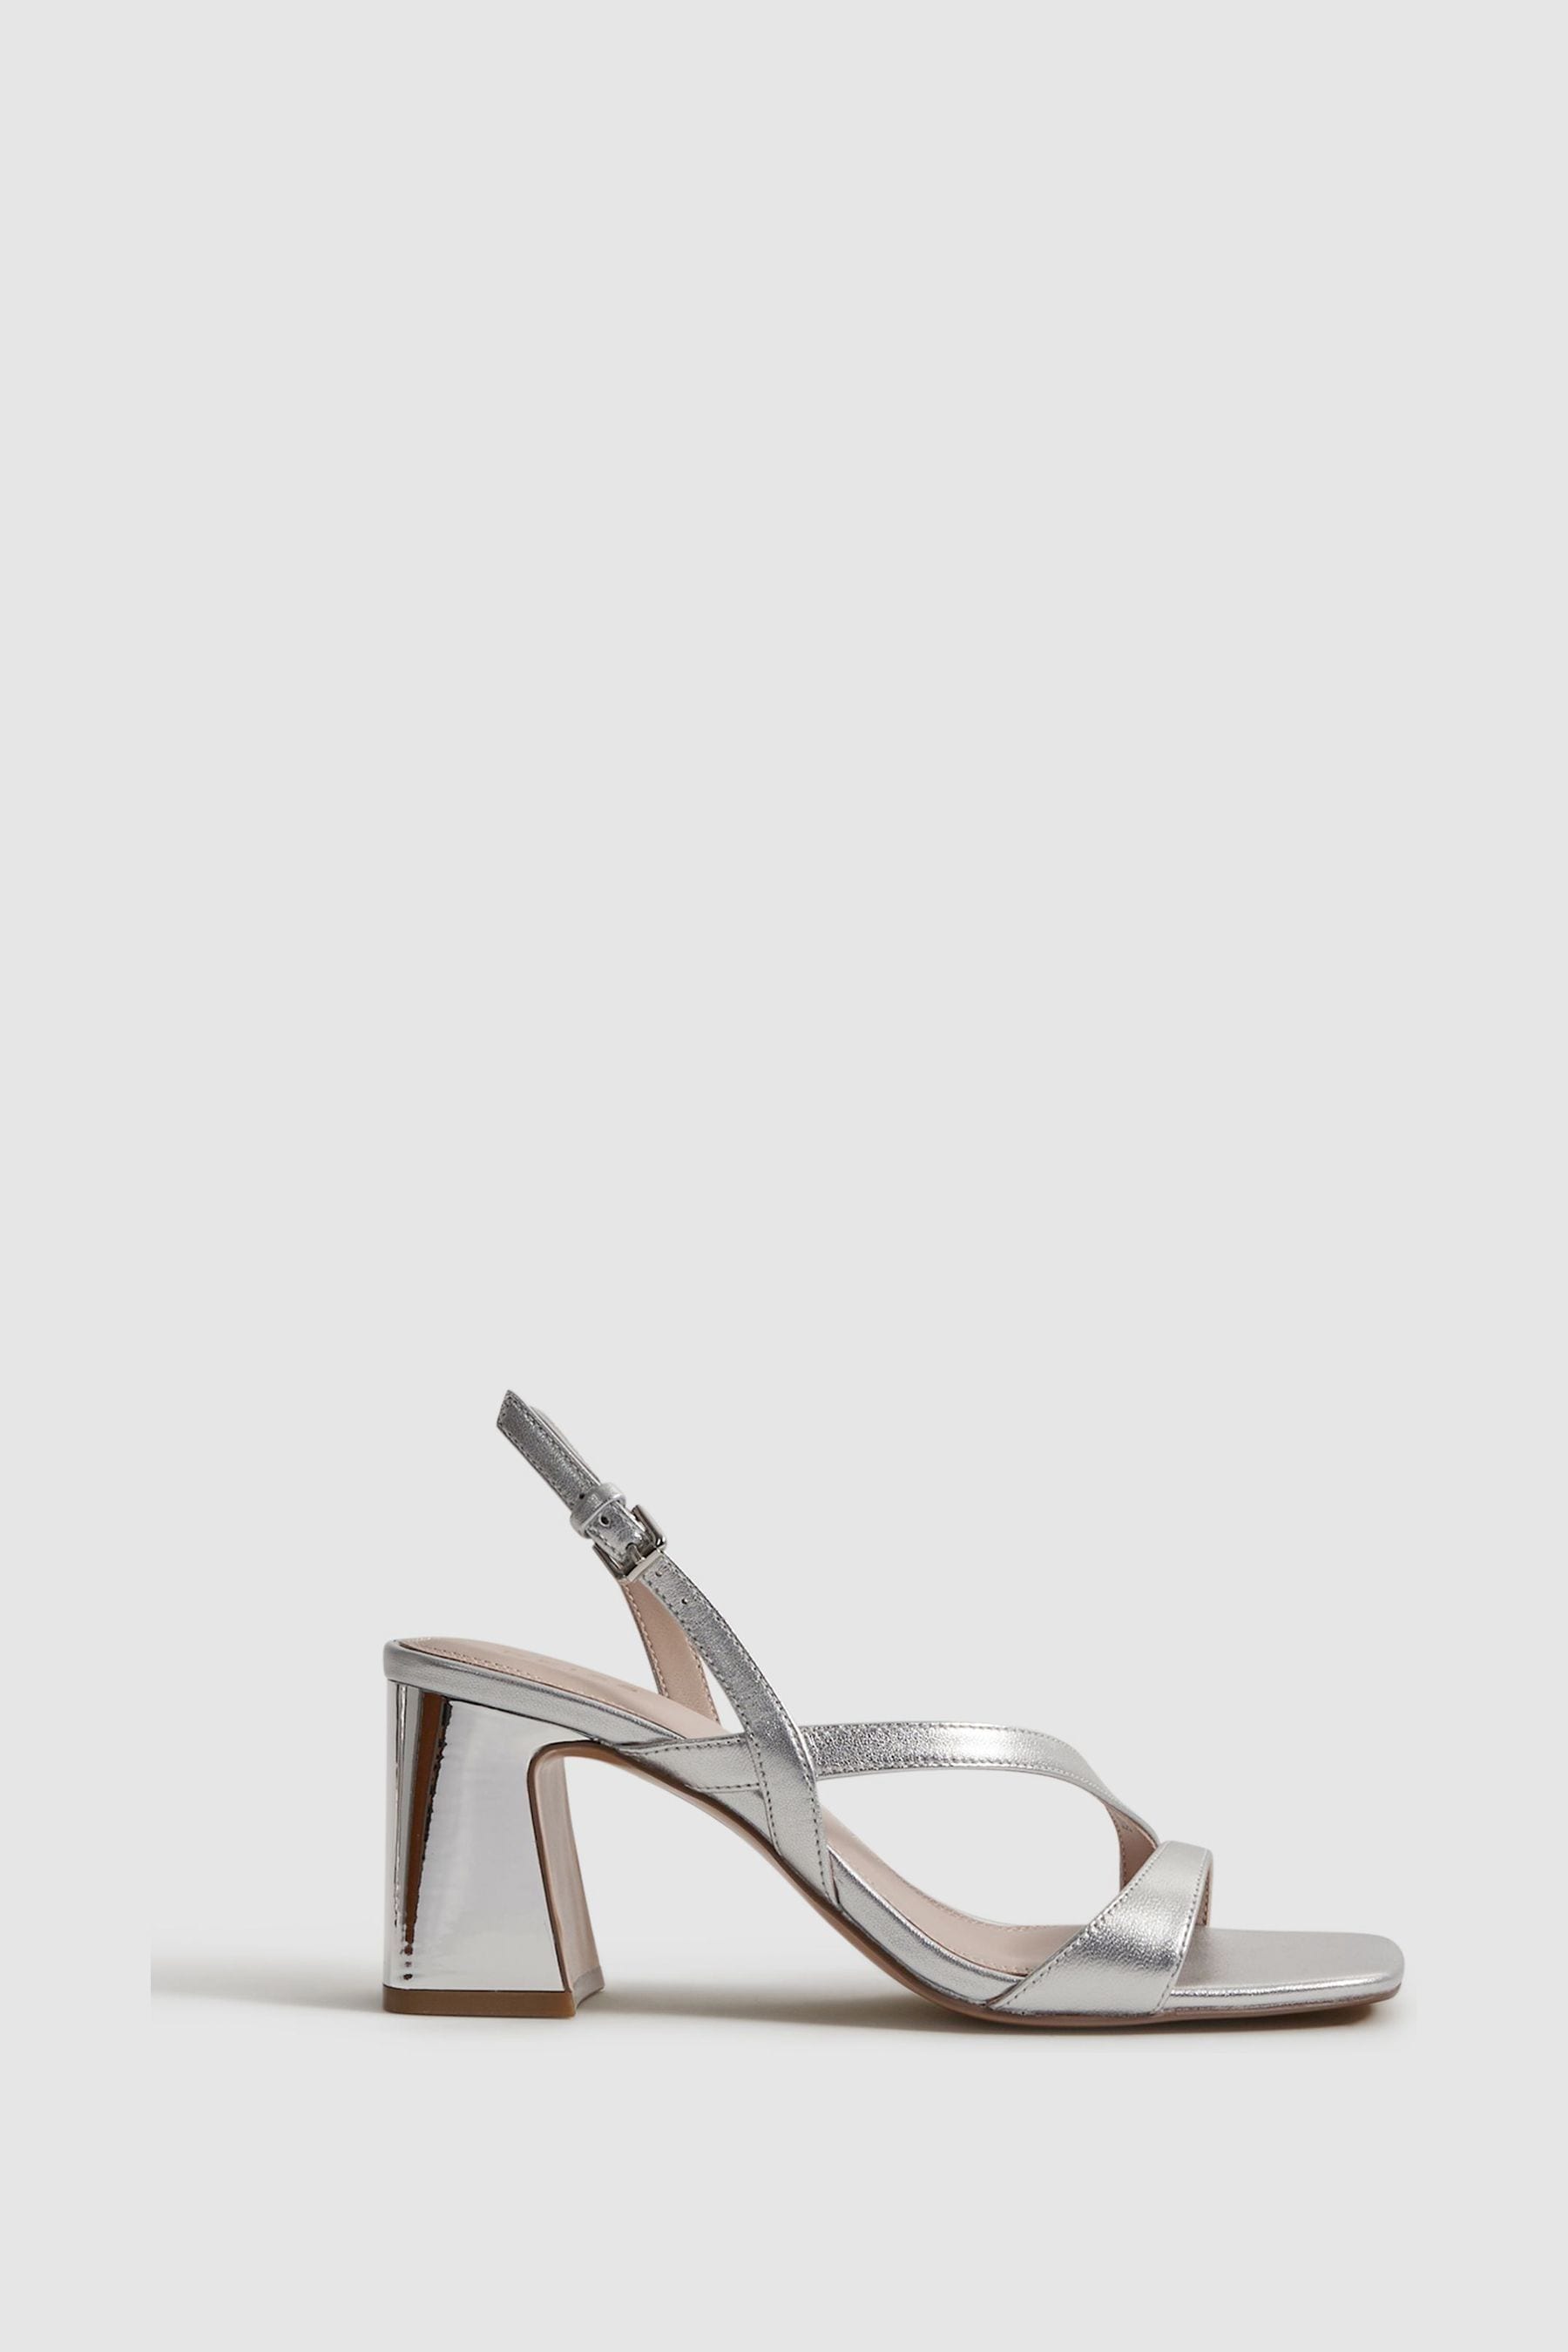 Reiss Alice - Silver Strappy Leather Heeled Sandals, Uk 7 Eu 40